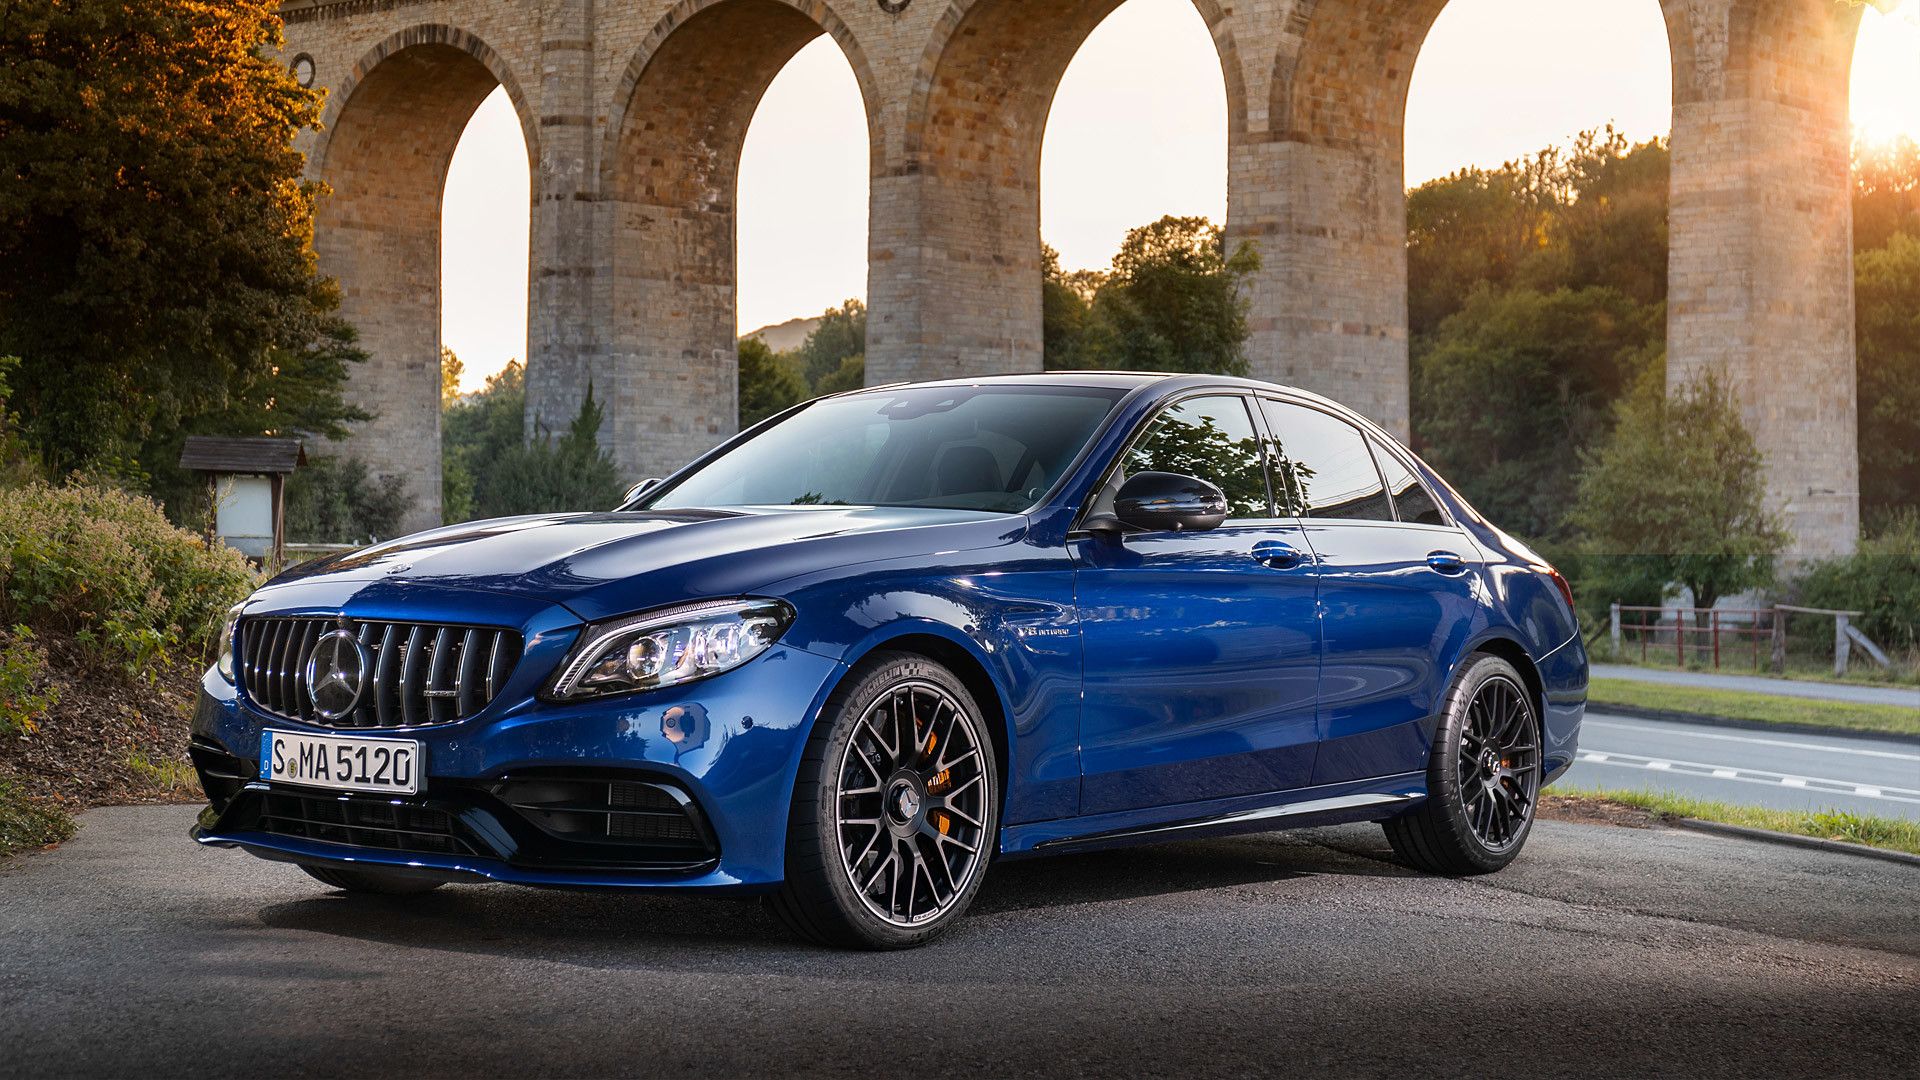 Mercedes Amg C63 S Picture C63 Amg 2019 HD Wallpaper